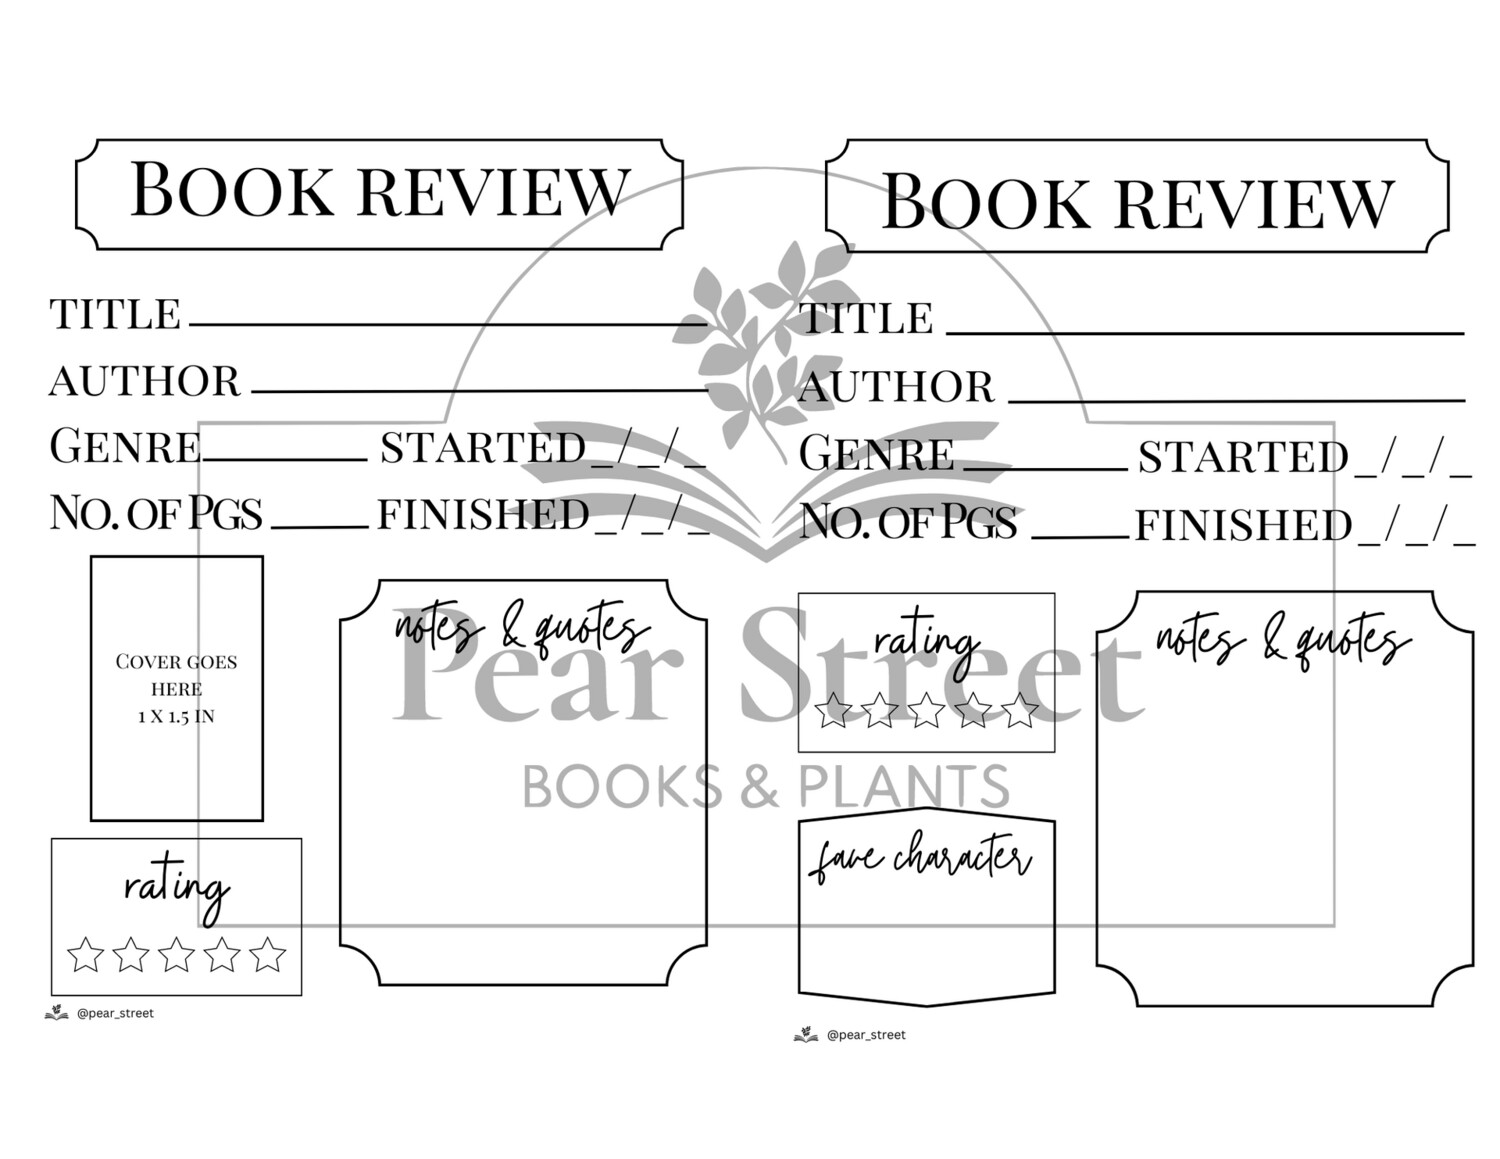 Book Review Printable for Book Journal, 2 versions, minimalist design